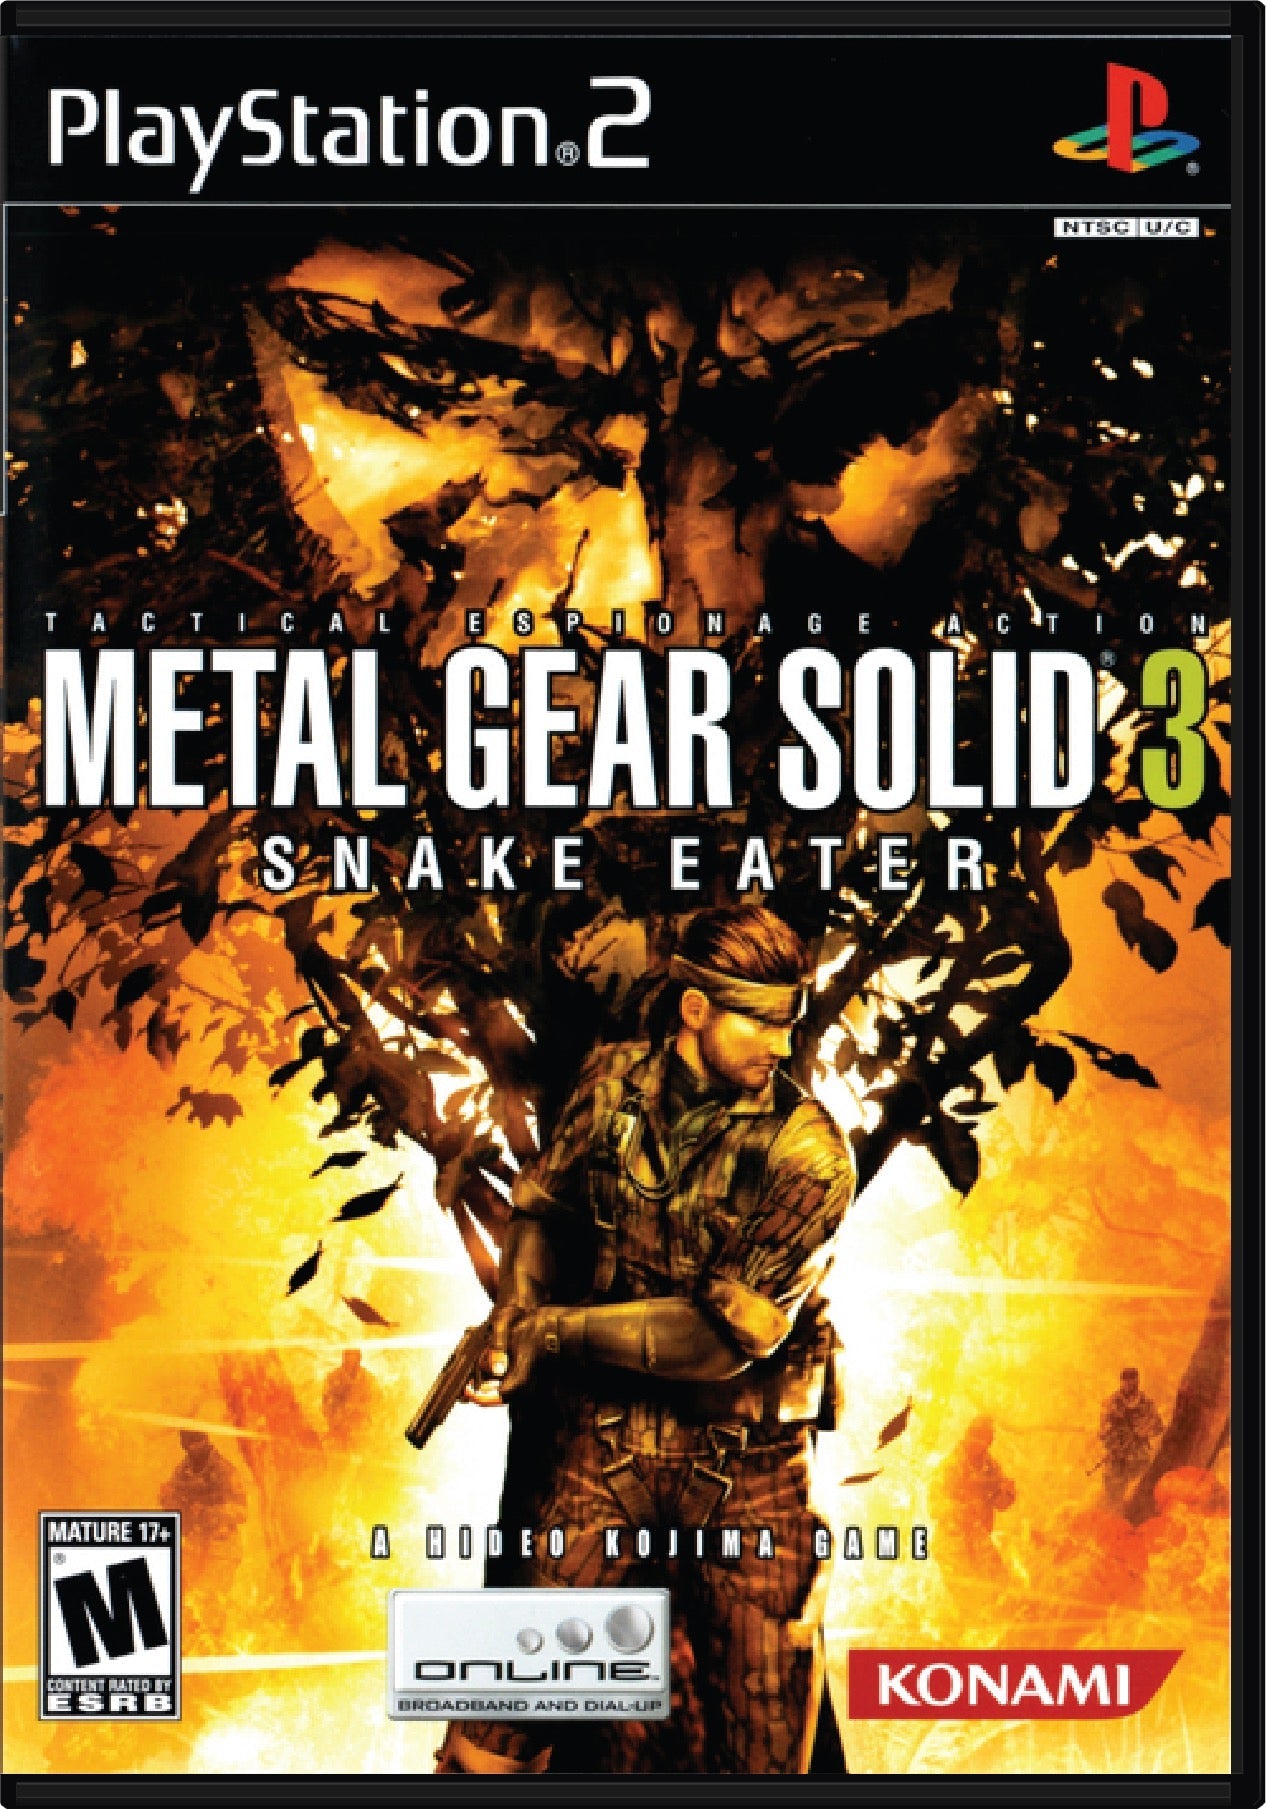 Metal Gear Solid 3 Snake Eater Cover Art and Product Photo